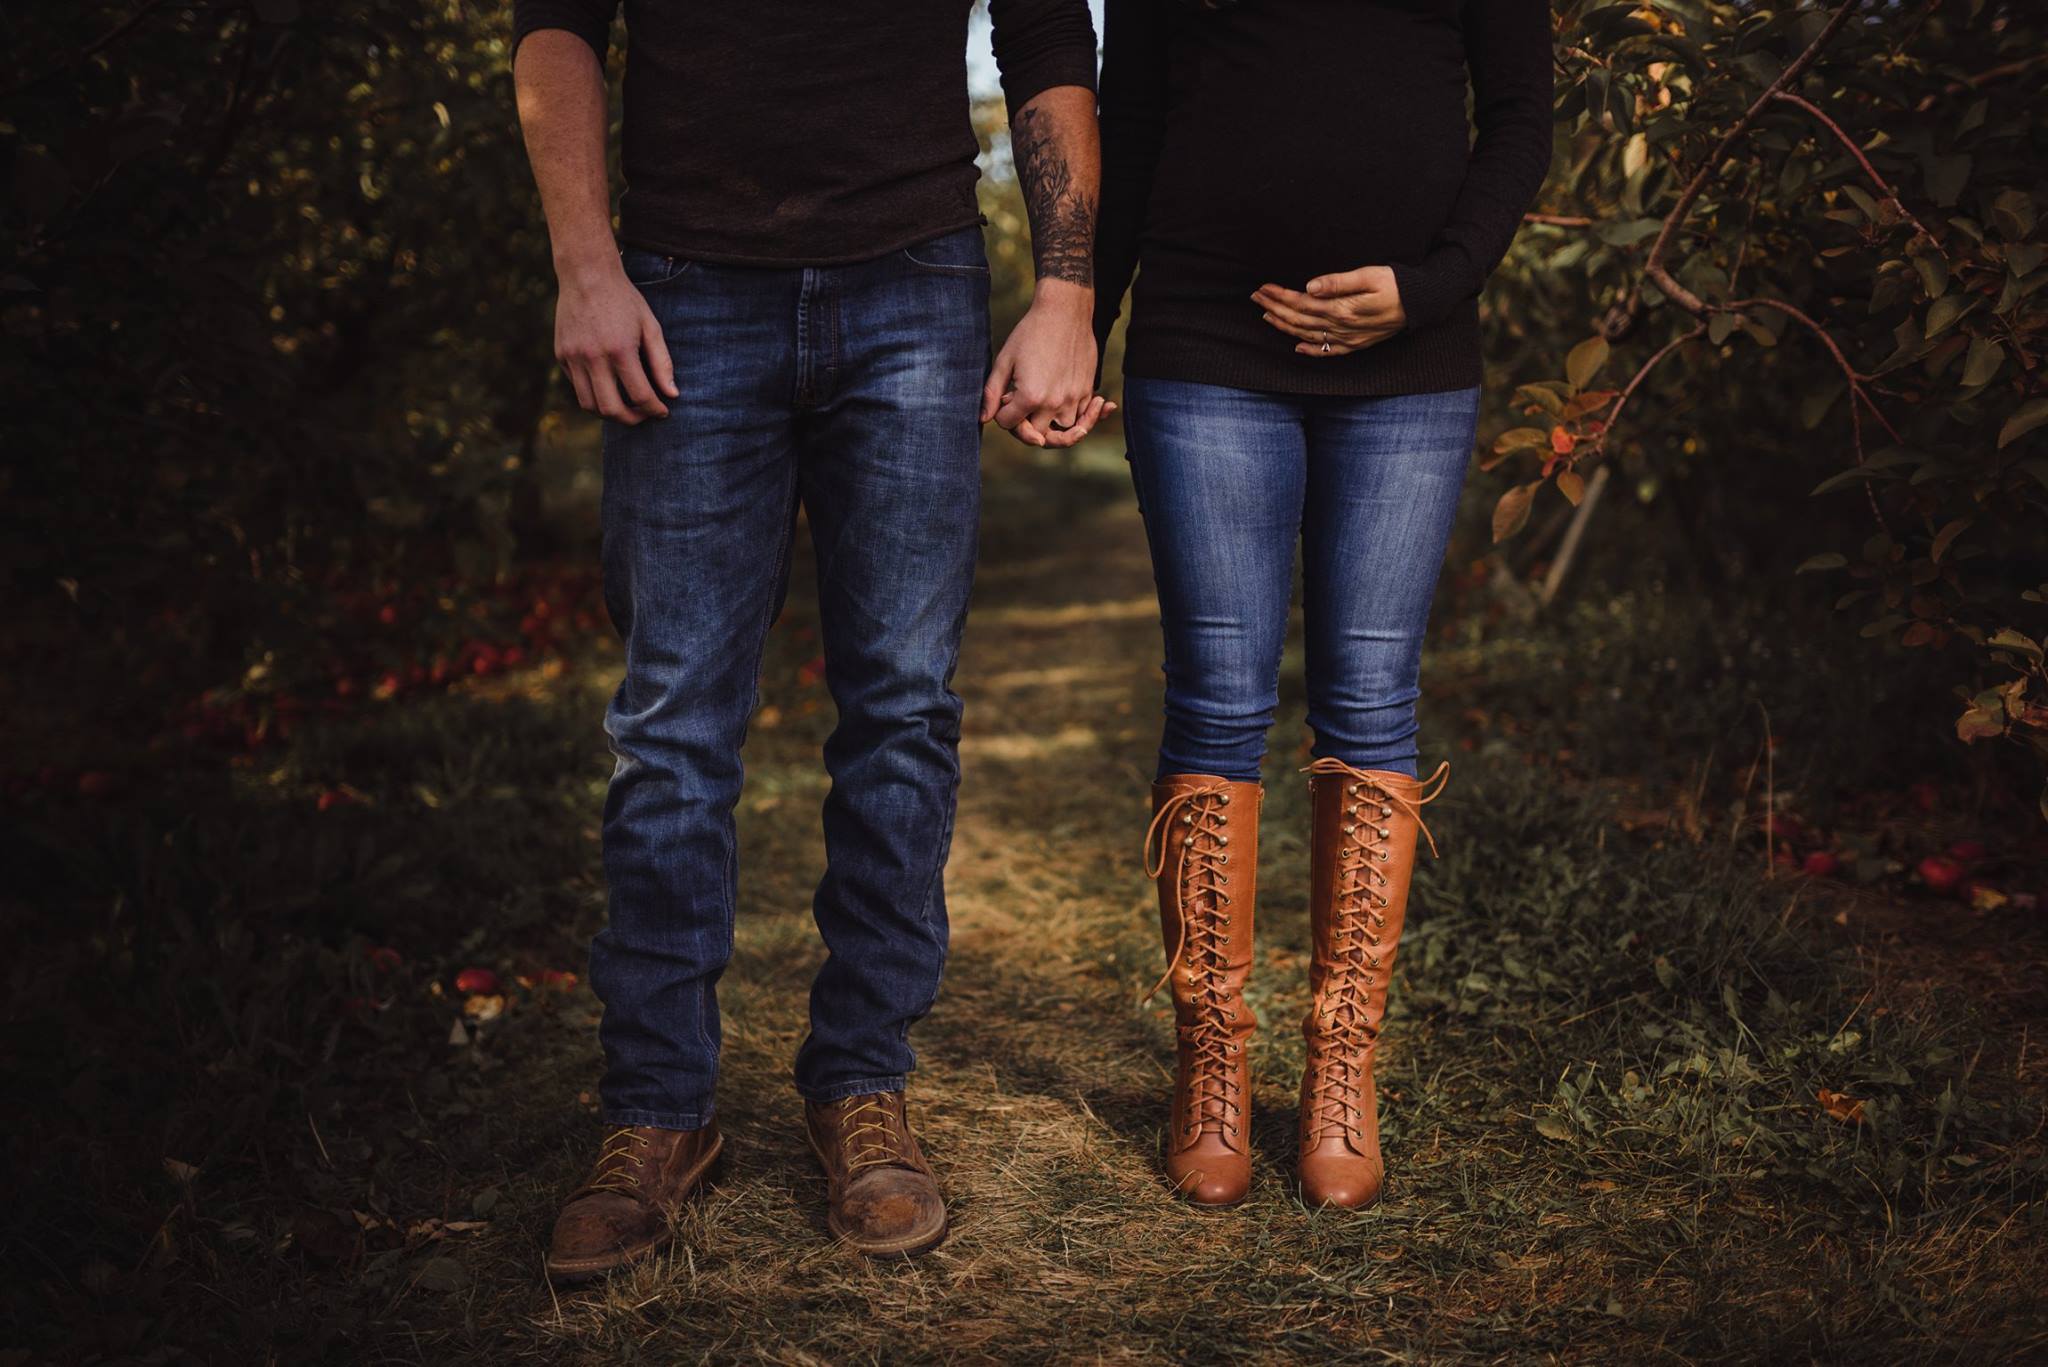 Couple with jeans and black shirt pose for maternity photos